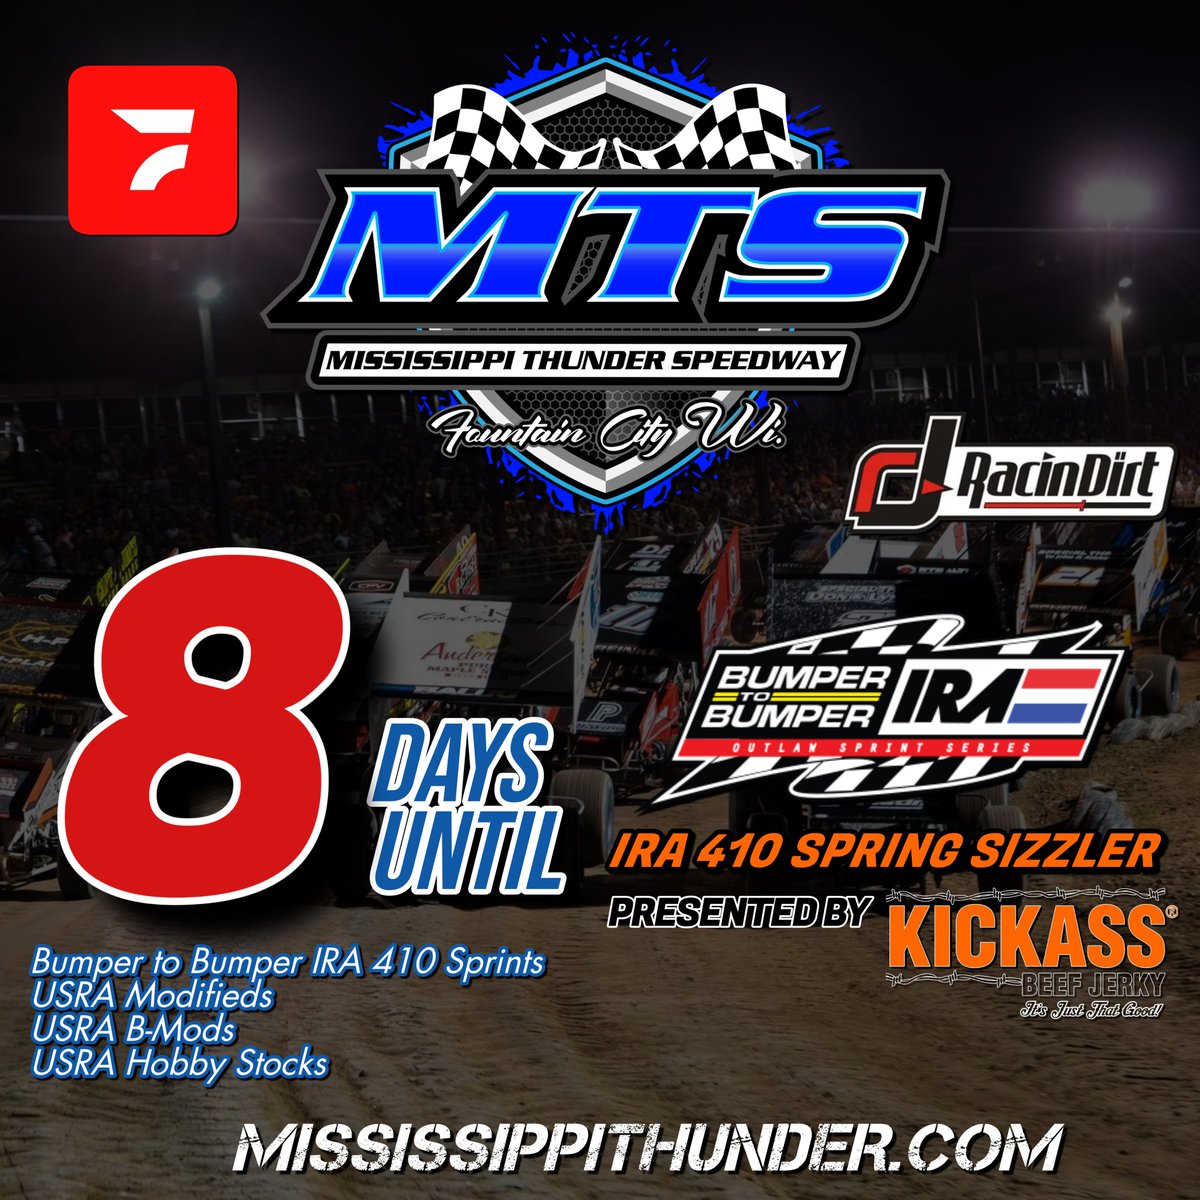 Only eight days away from getting the 2024 season started with the Bumper to Bumper @IRA_sprints 410 Spring Sizzler presented by @KICKASSBEEFJERK! Visit mississippithunder.com for details on admission prices and event times!